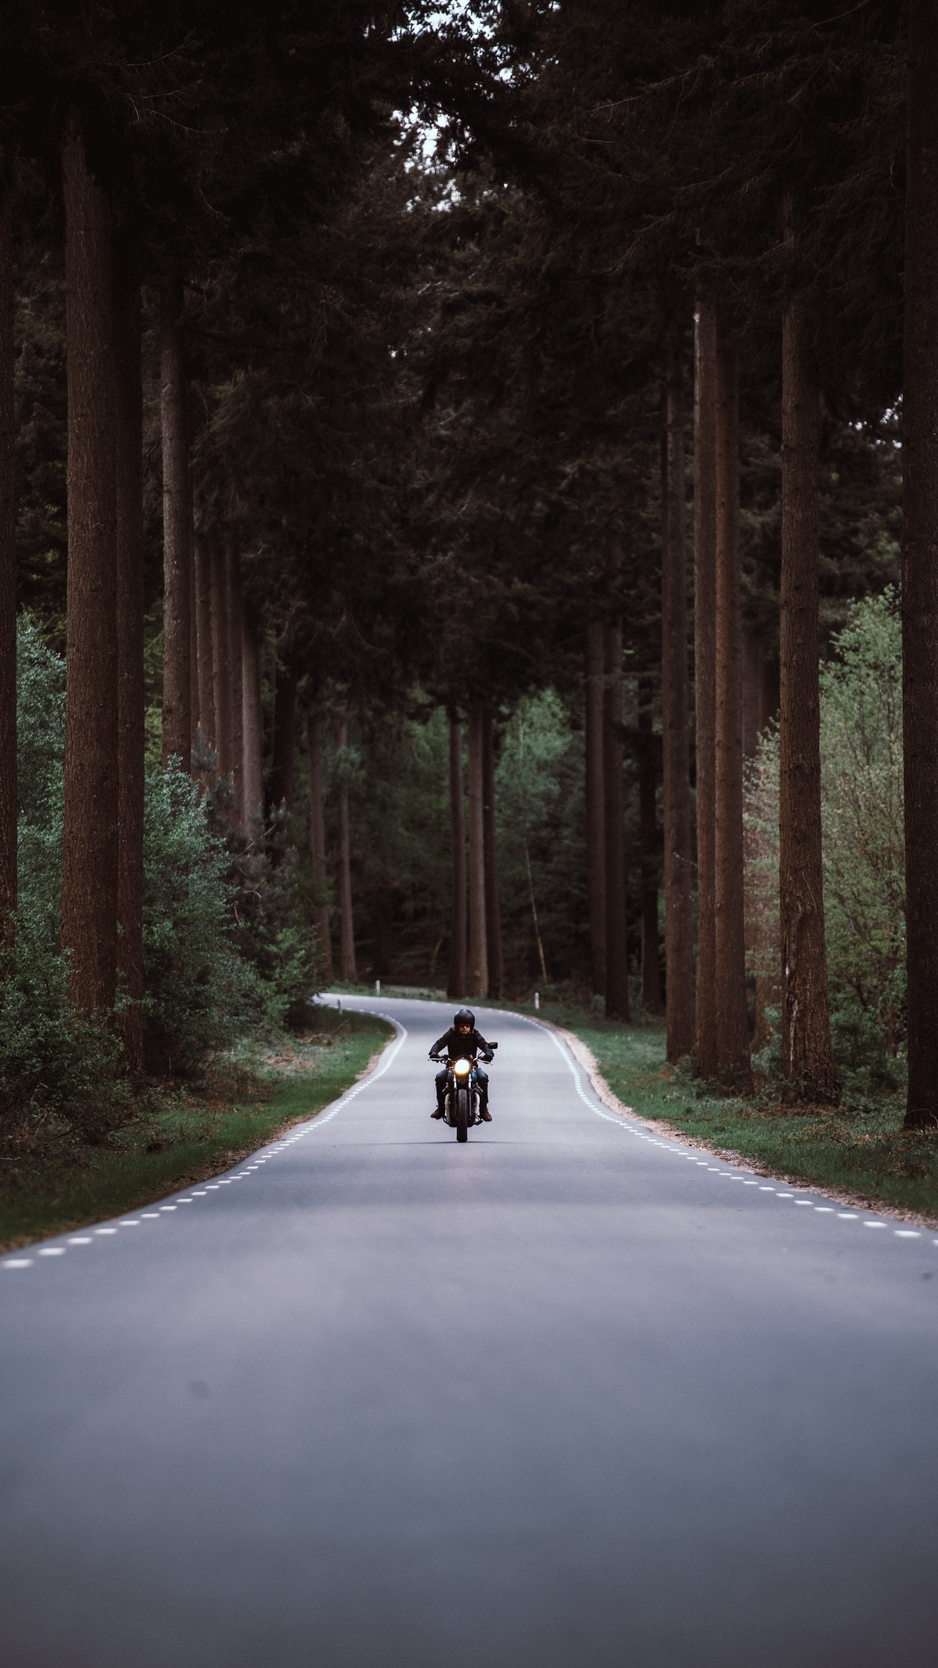 Wallpaper Motorcyclist, Motorcycle, Road, Forest, Movement, - Motorcycle On The Road - HD Wallpaper 